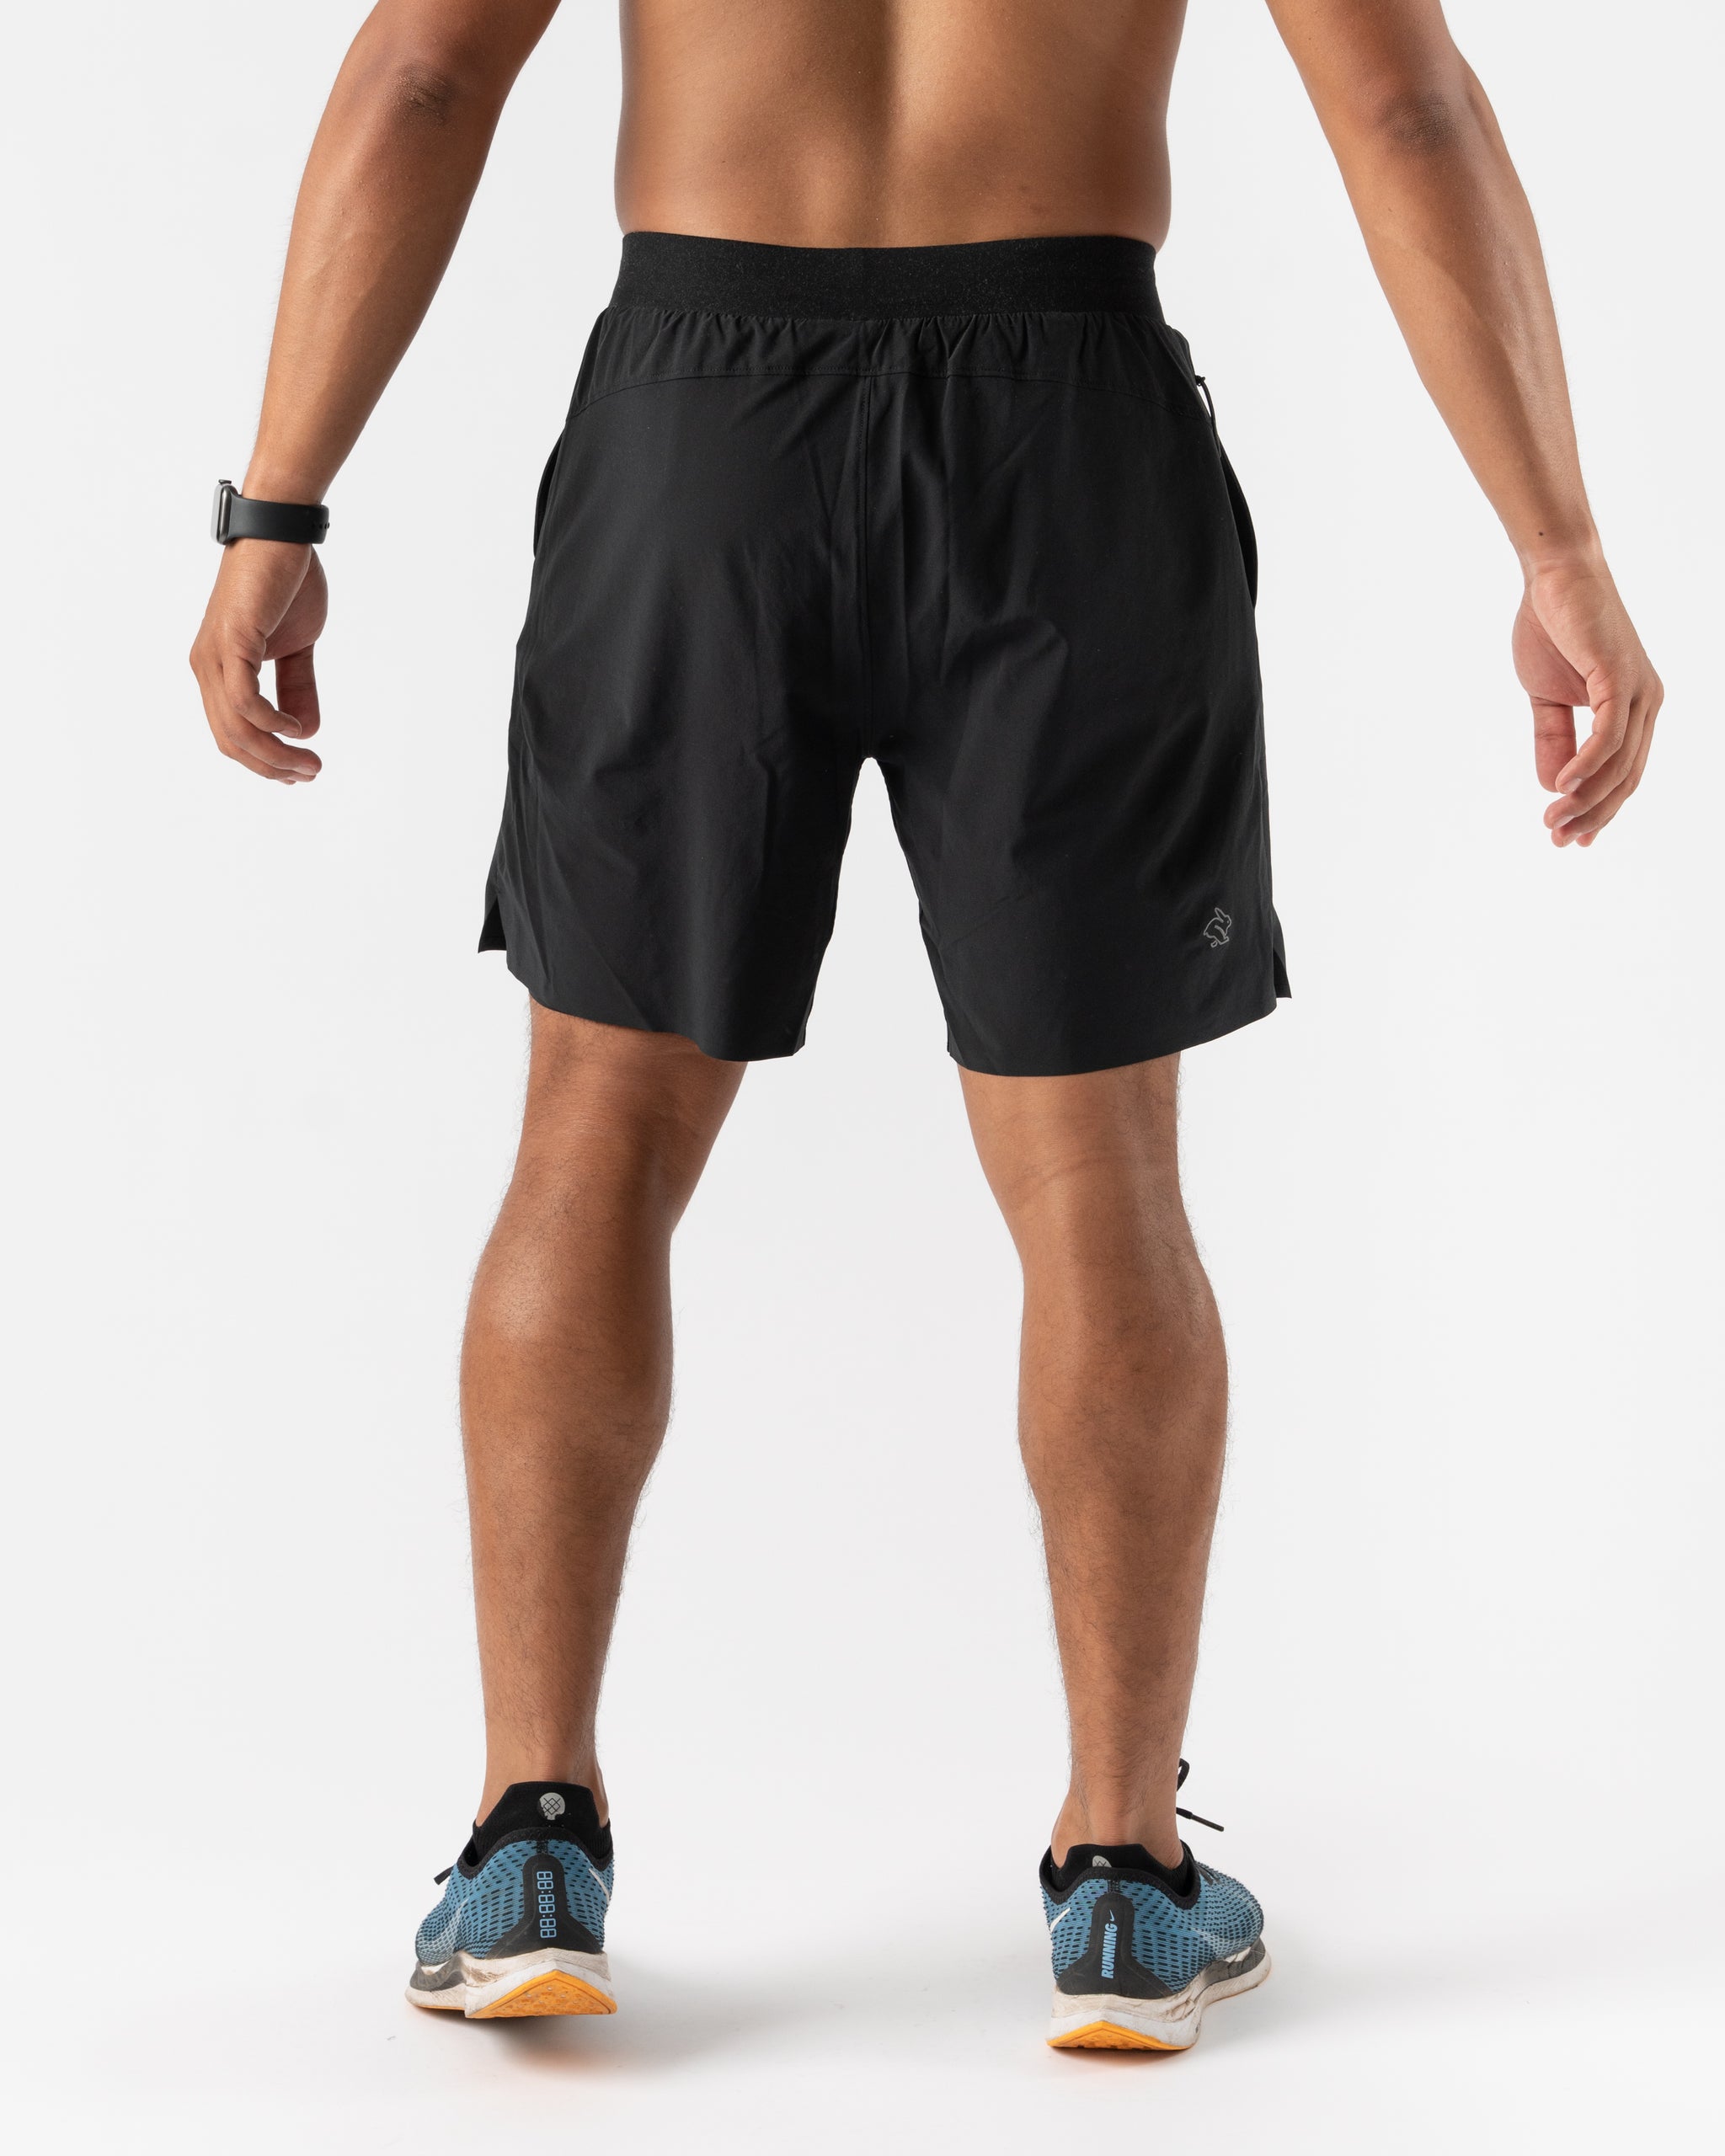 Men's 5 Inch Running Shorts With 2in1 Compression liners (🔥Buy 1 Get 1  Free)